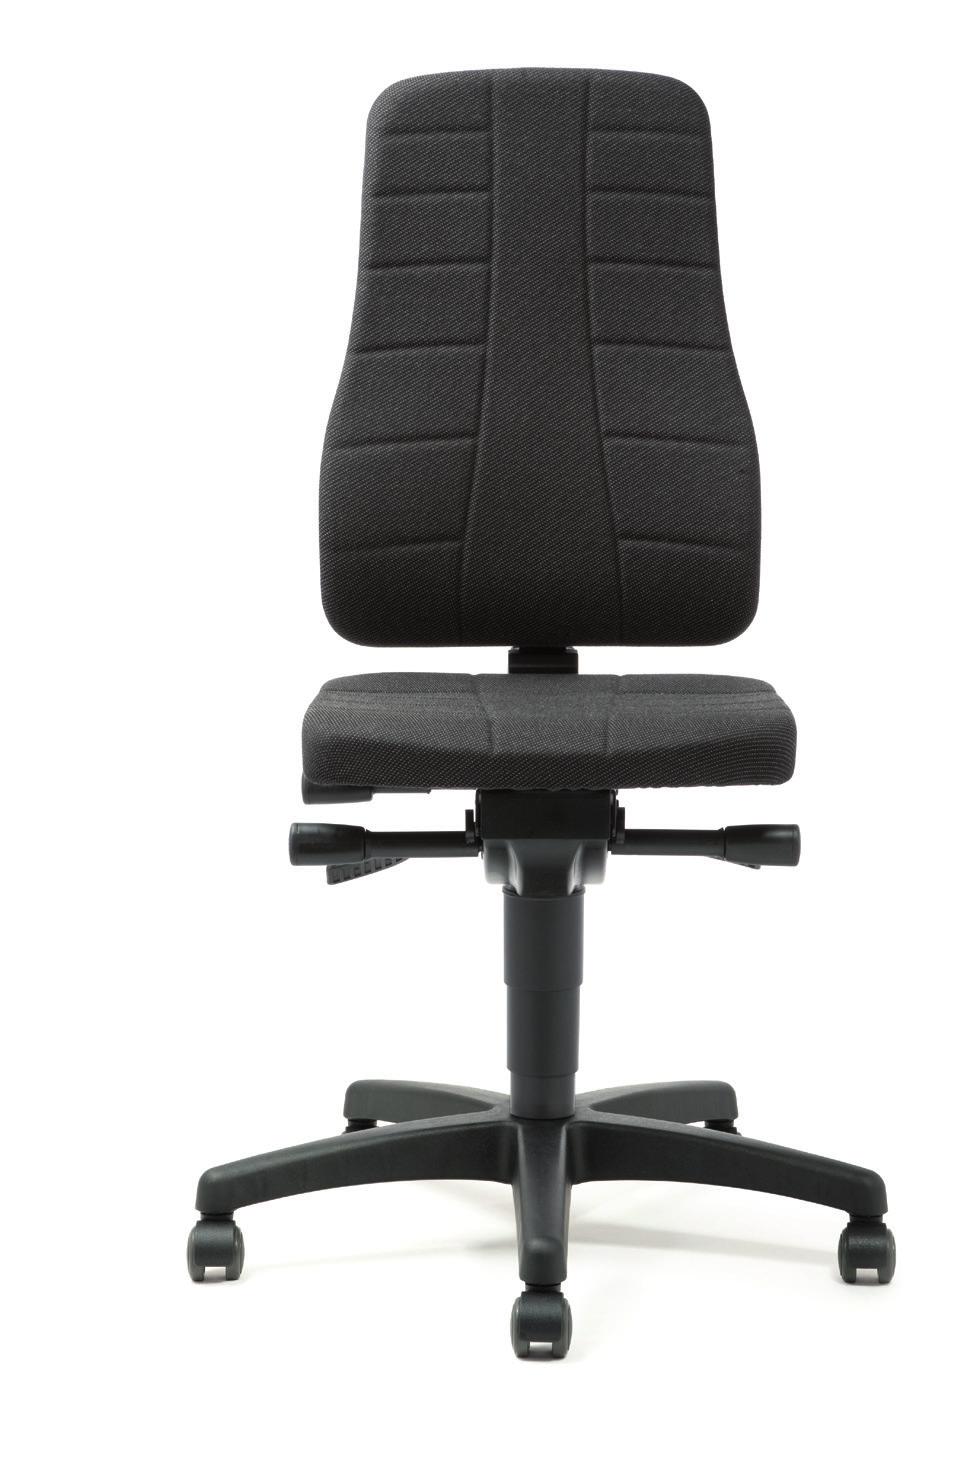 Besides the outstanding ergonomic features, the requirements of industrial and technical working environments for the materials and construction of the chair are well taken into account.